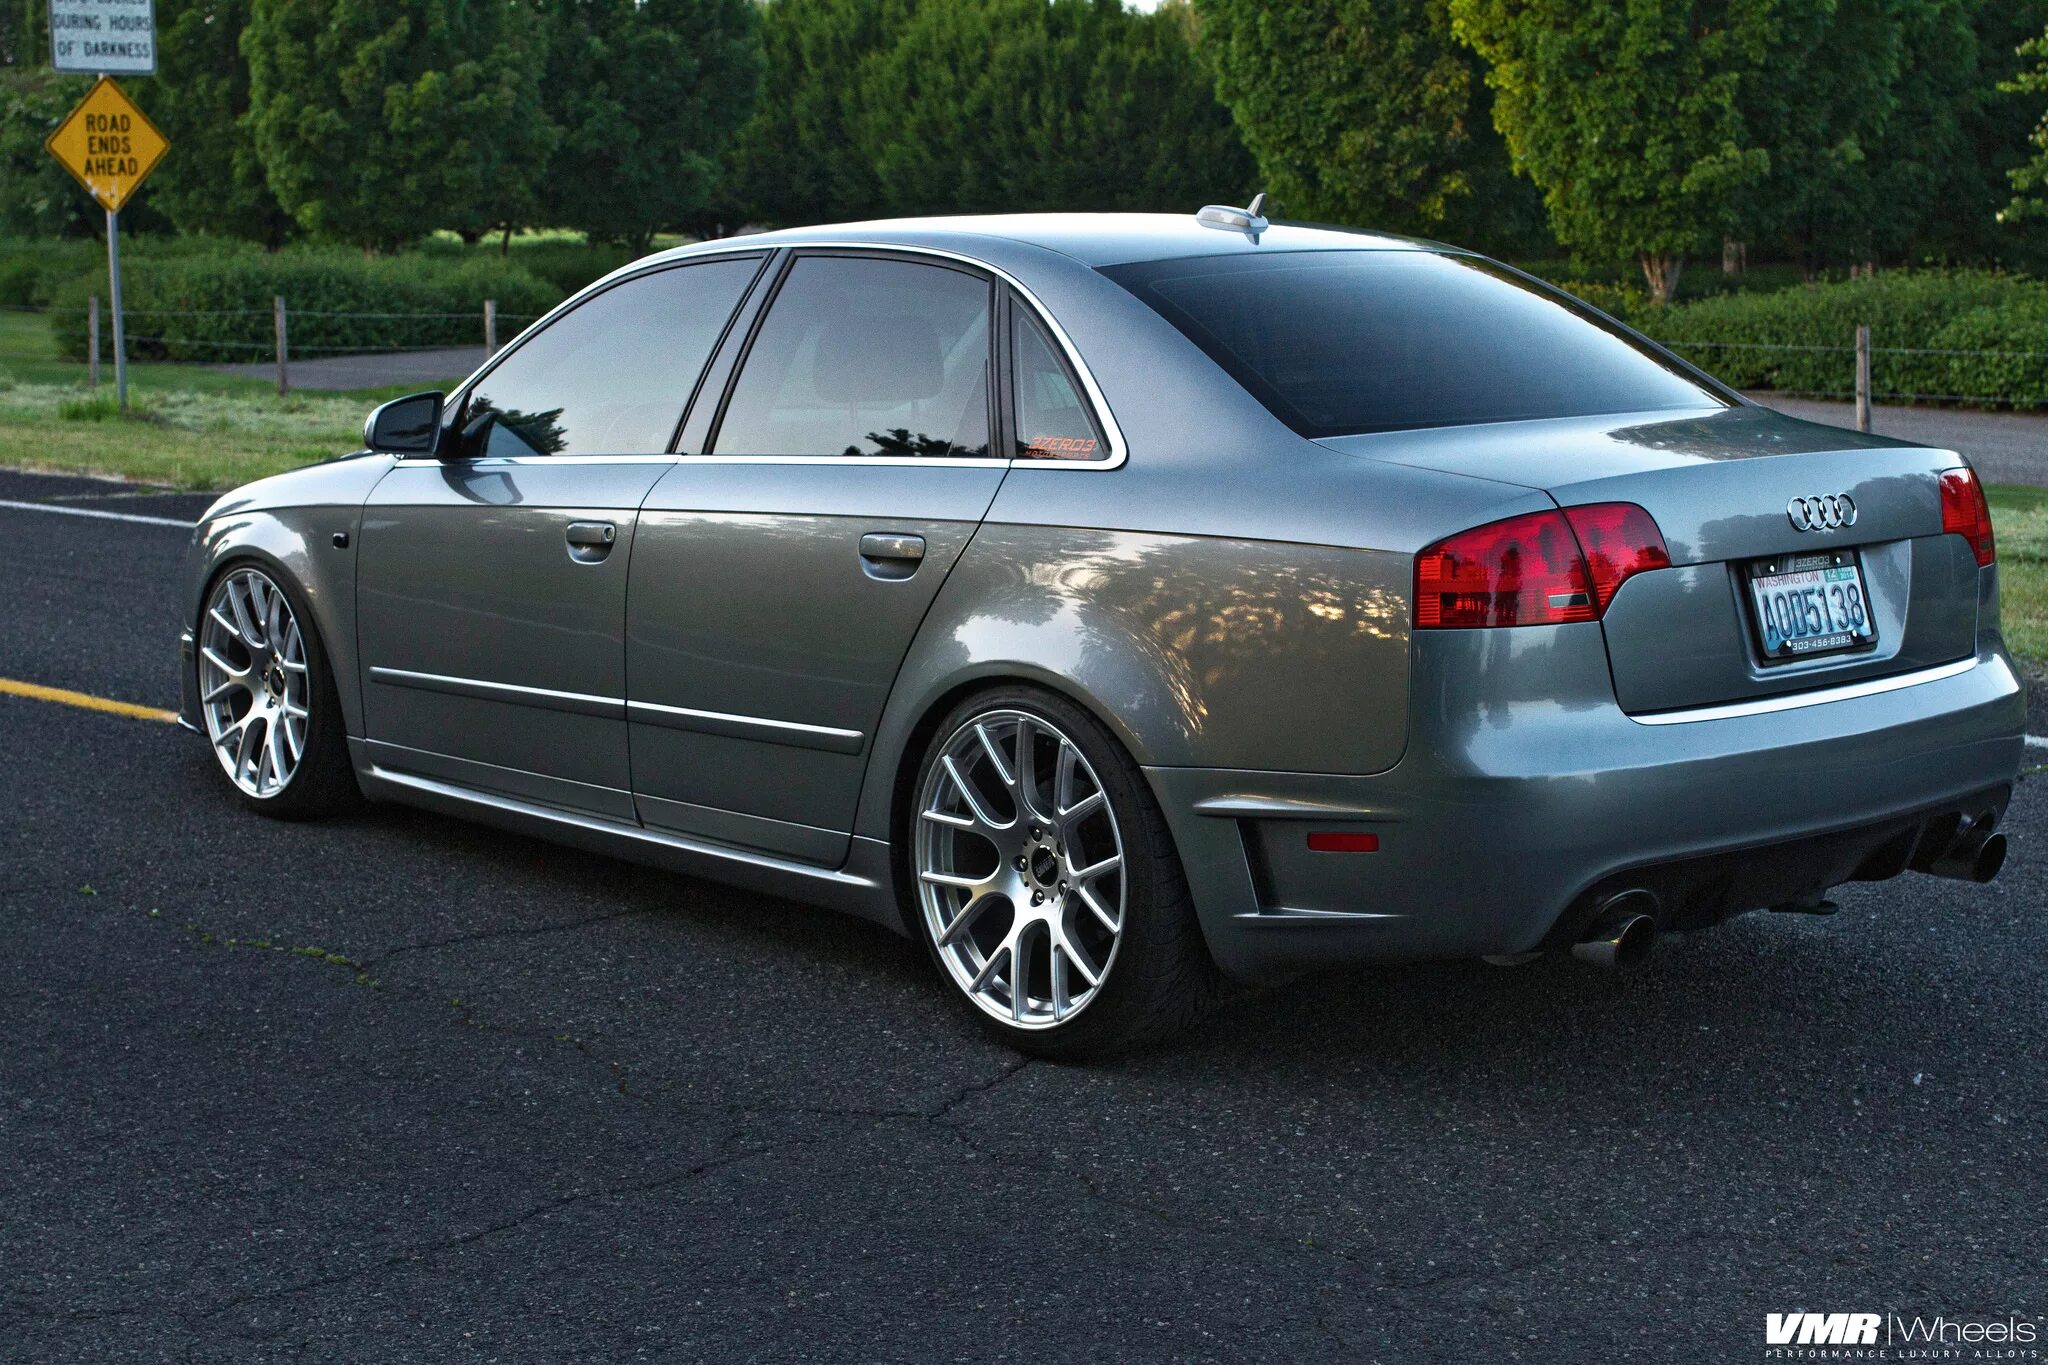 B4 2 b6 200. Audi a4 b7. Audi a4 b7 avant Tuning. Audi a4 b7 r19. Audi a4 b7 (s4,rs4).